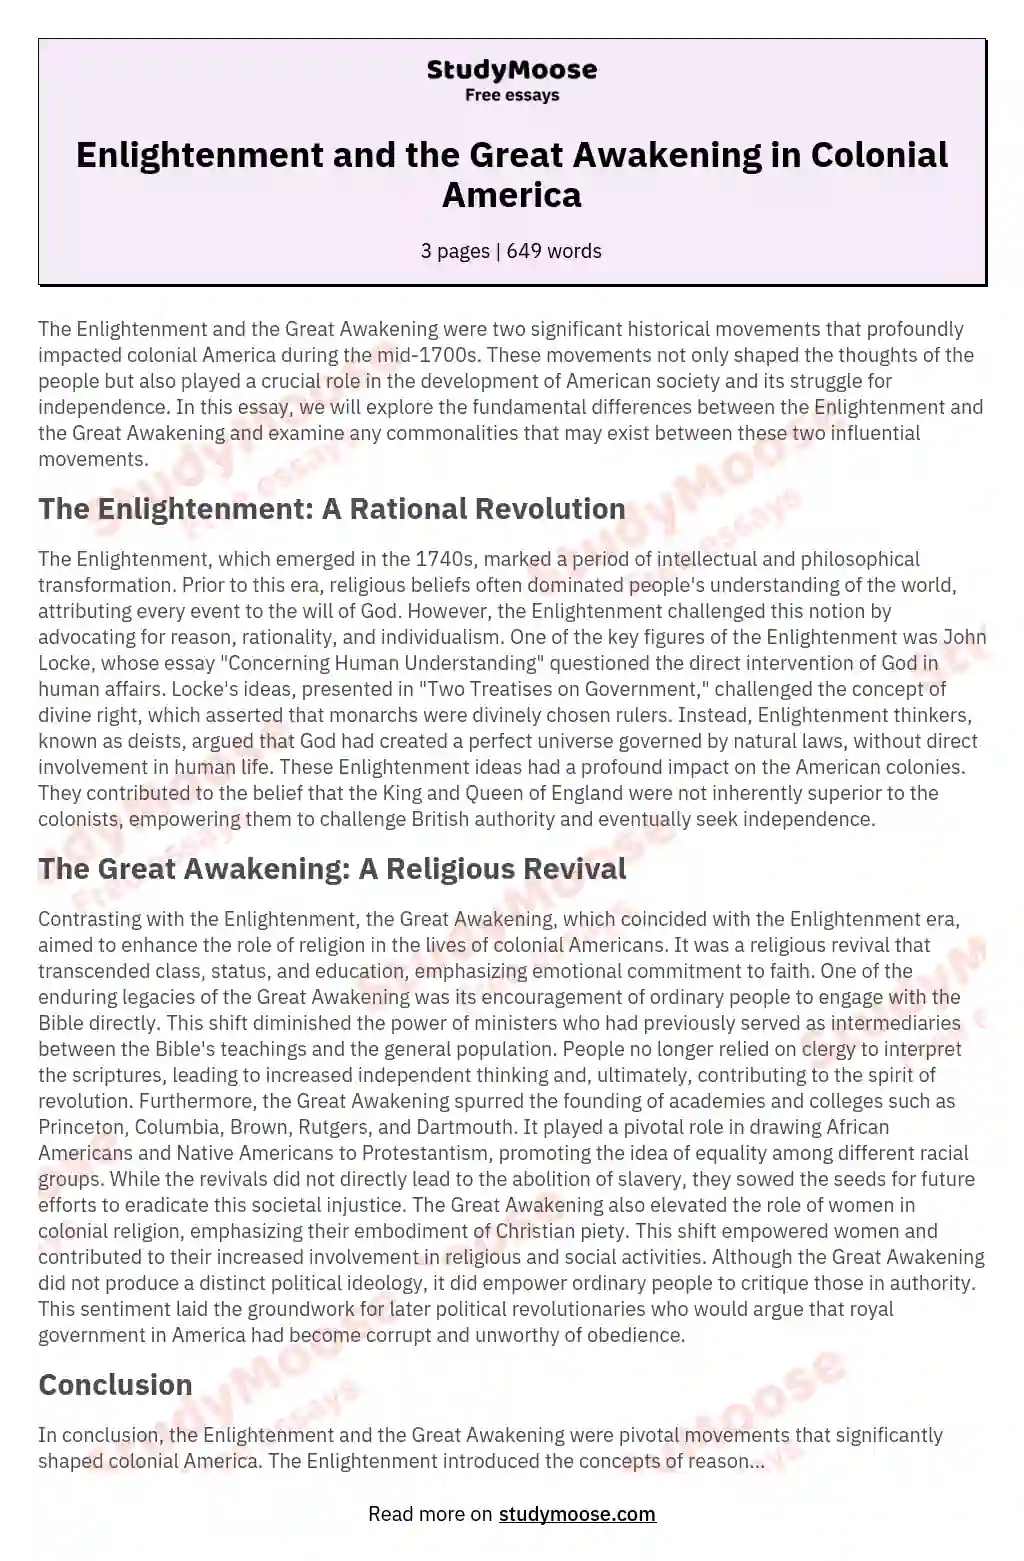 Enlightenment and the Great Awakening in Colonial America